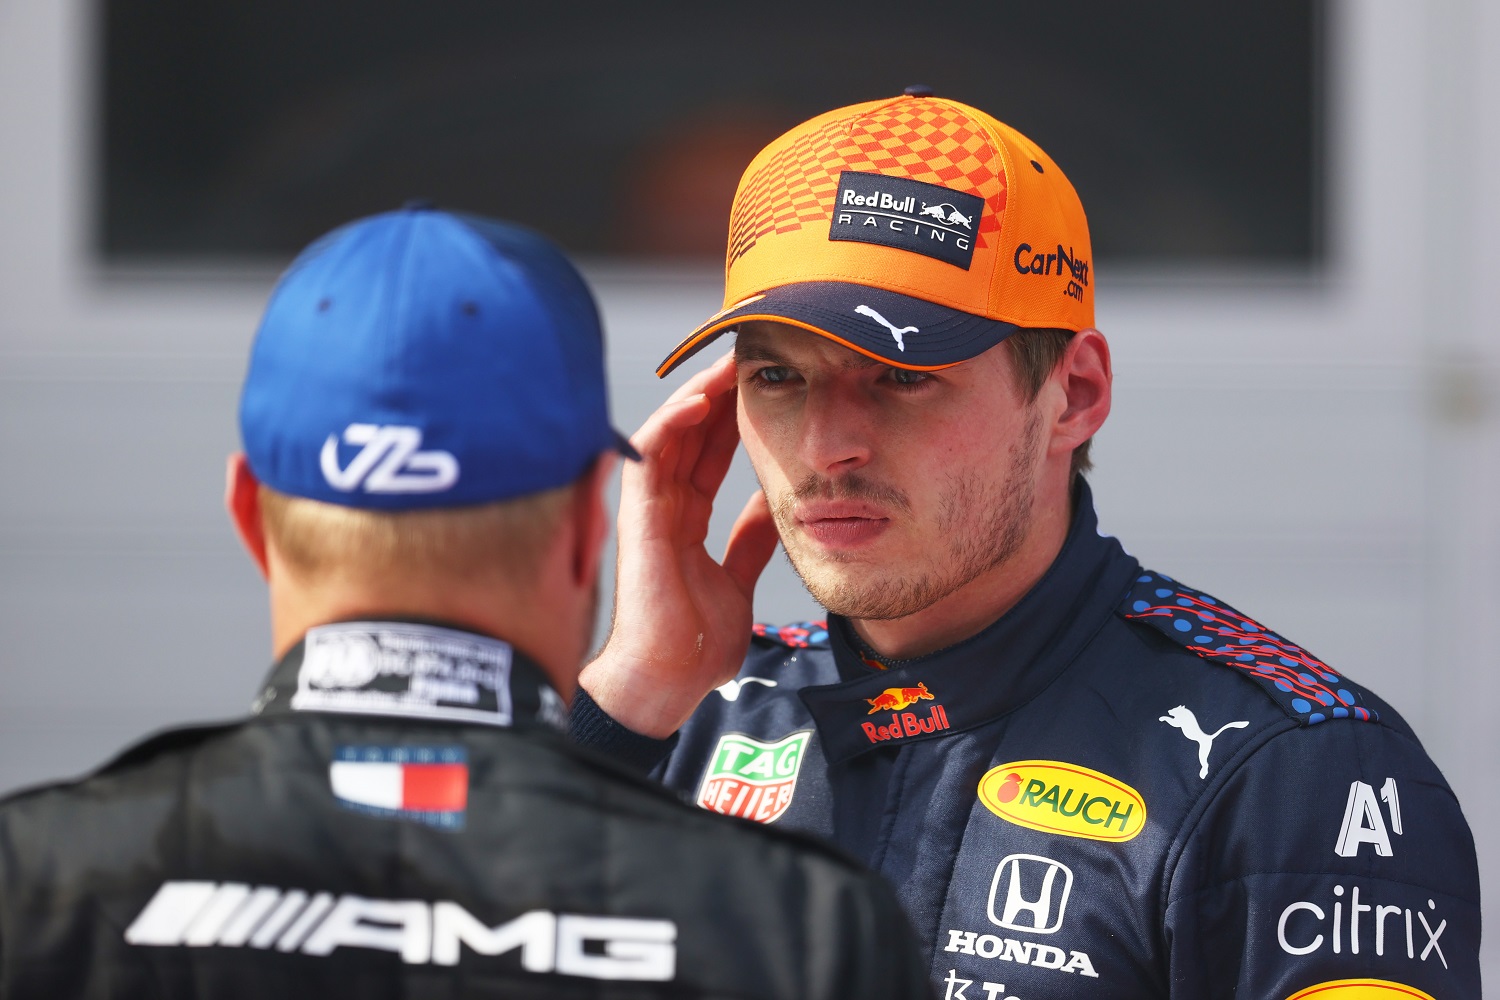 Race winner Max Verstappen of Red Bull Racing and second-place finisher Valtteri Bottas of Mercedes talk at the F1 Grand Prix of Austria at Red Bull Ring. | Clive Rose/Getty Images